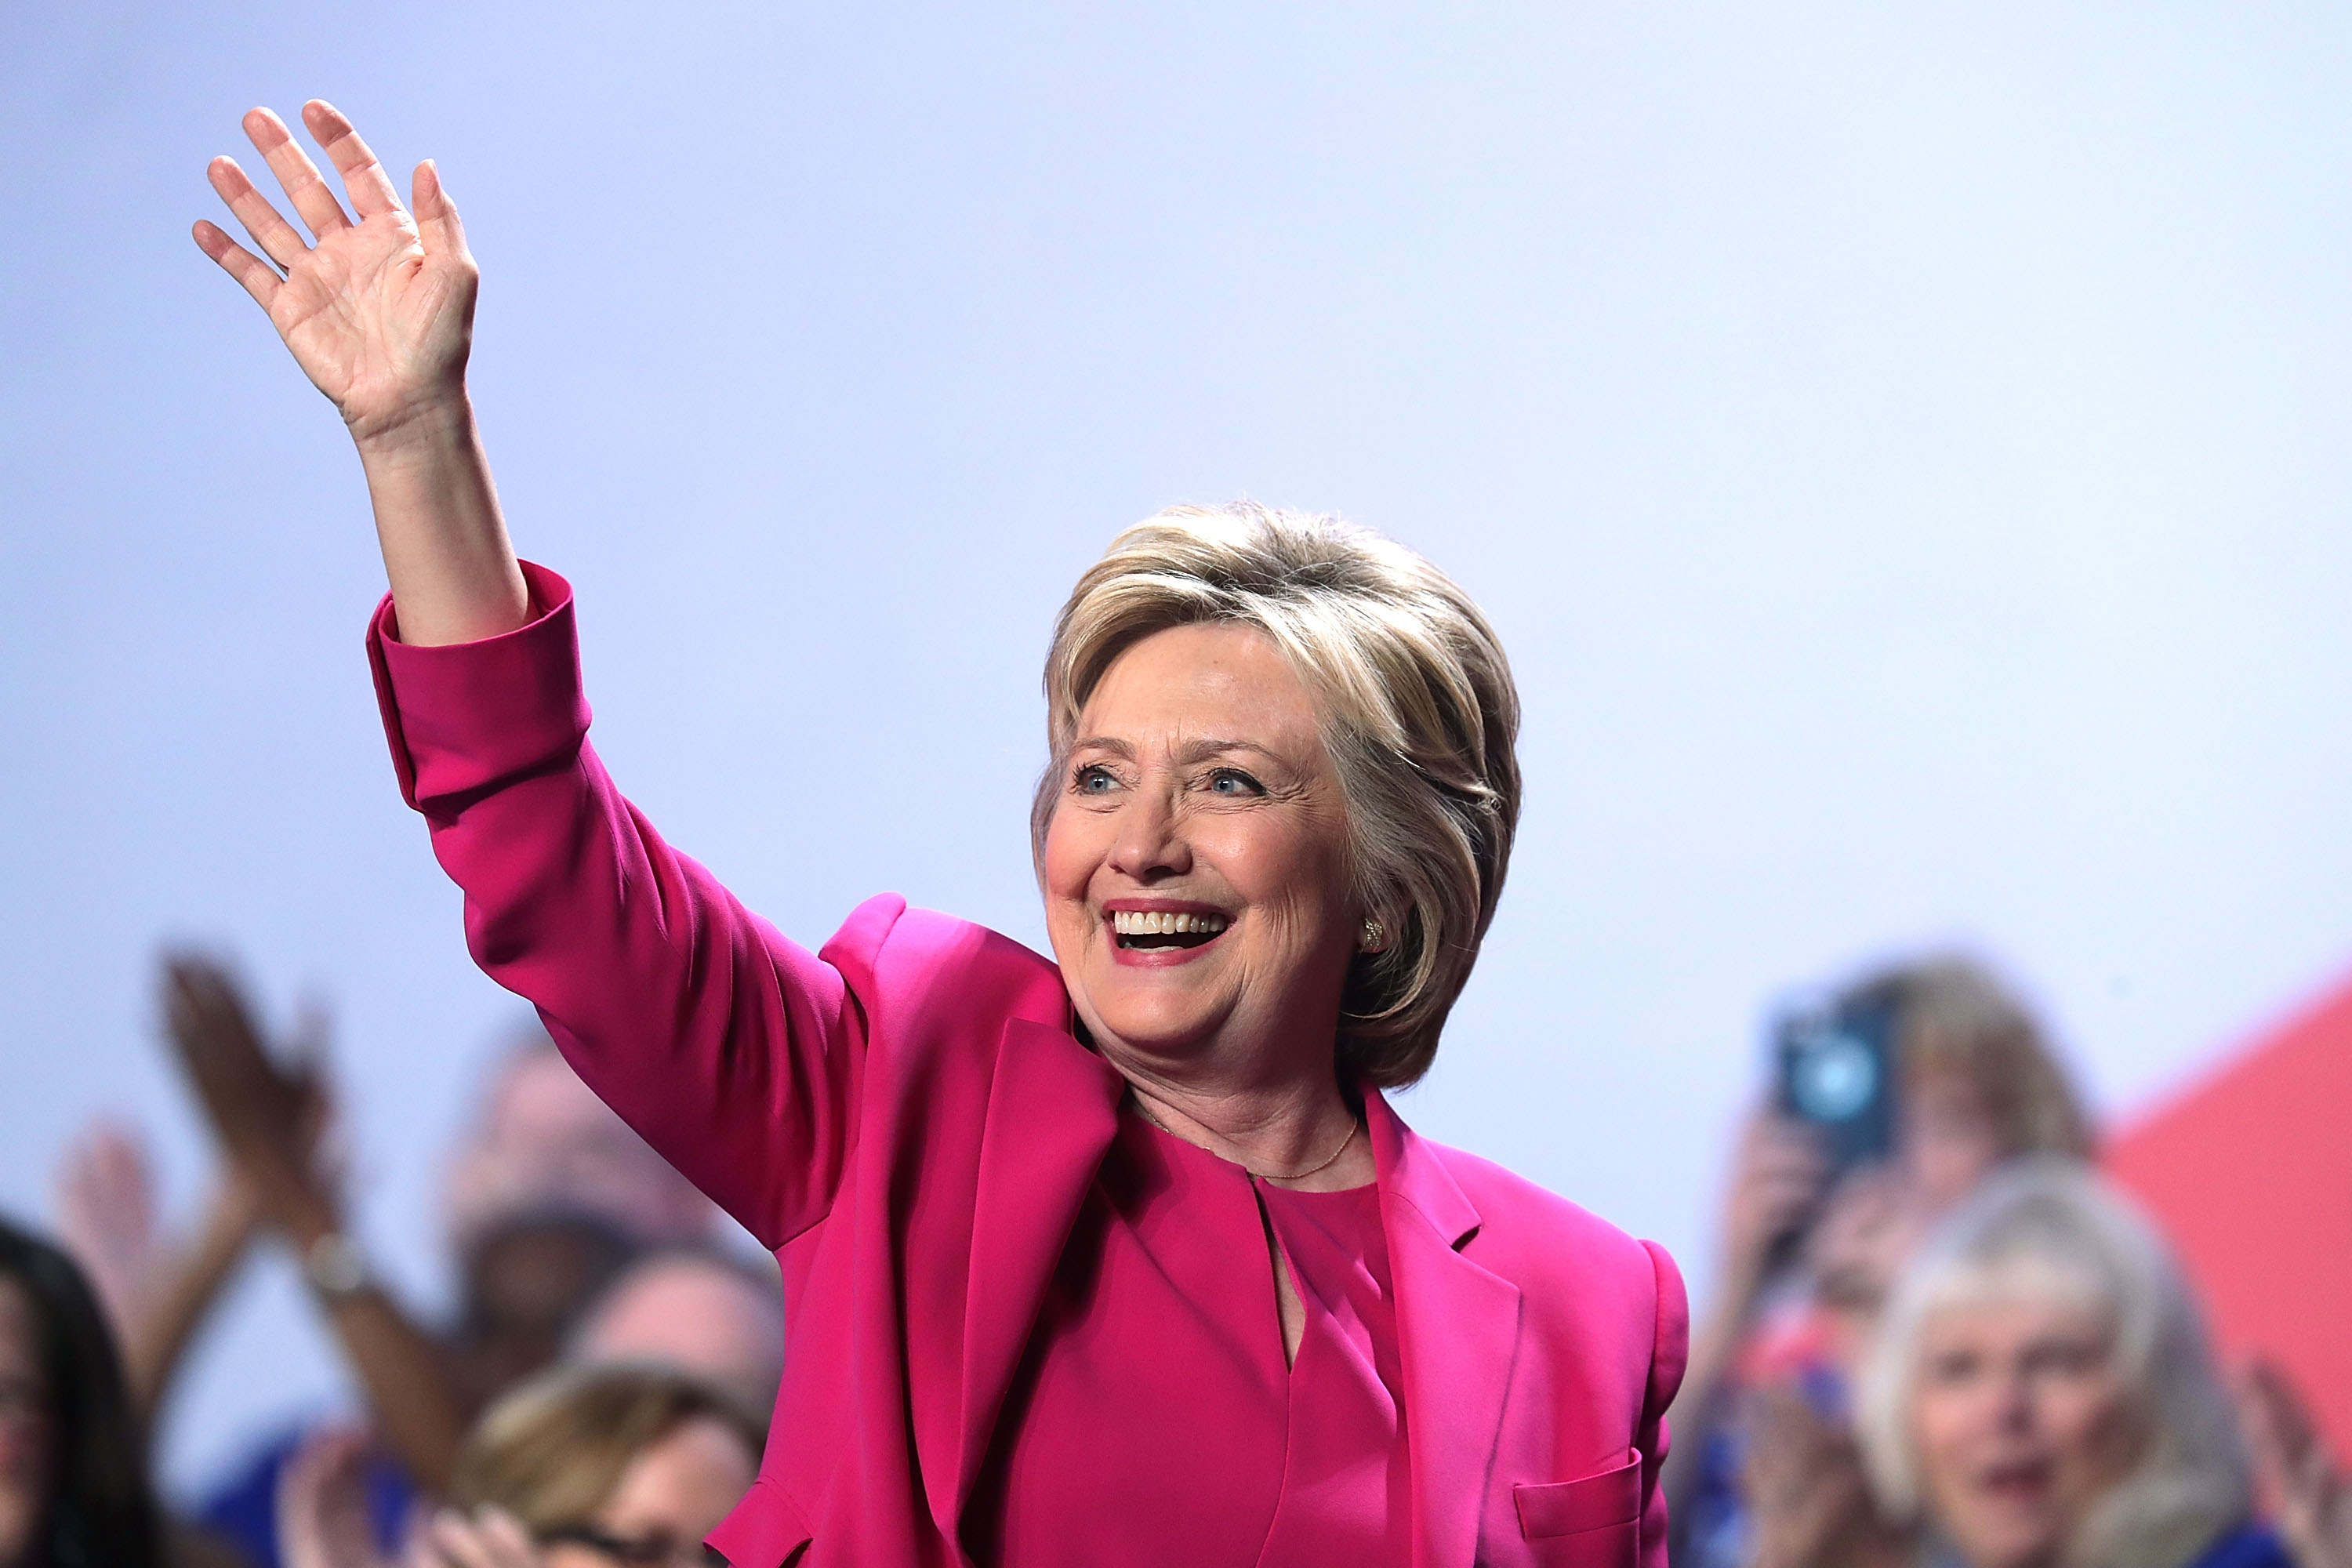 Democratic presidential candidate Hillary Rodham Clinton waves after she addressed the 95th Representative Assembly of the National Education Association on July 5, 2016 in Washington, DC. (Alex Wong/Getty Images)